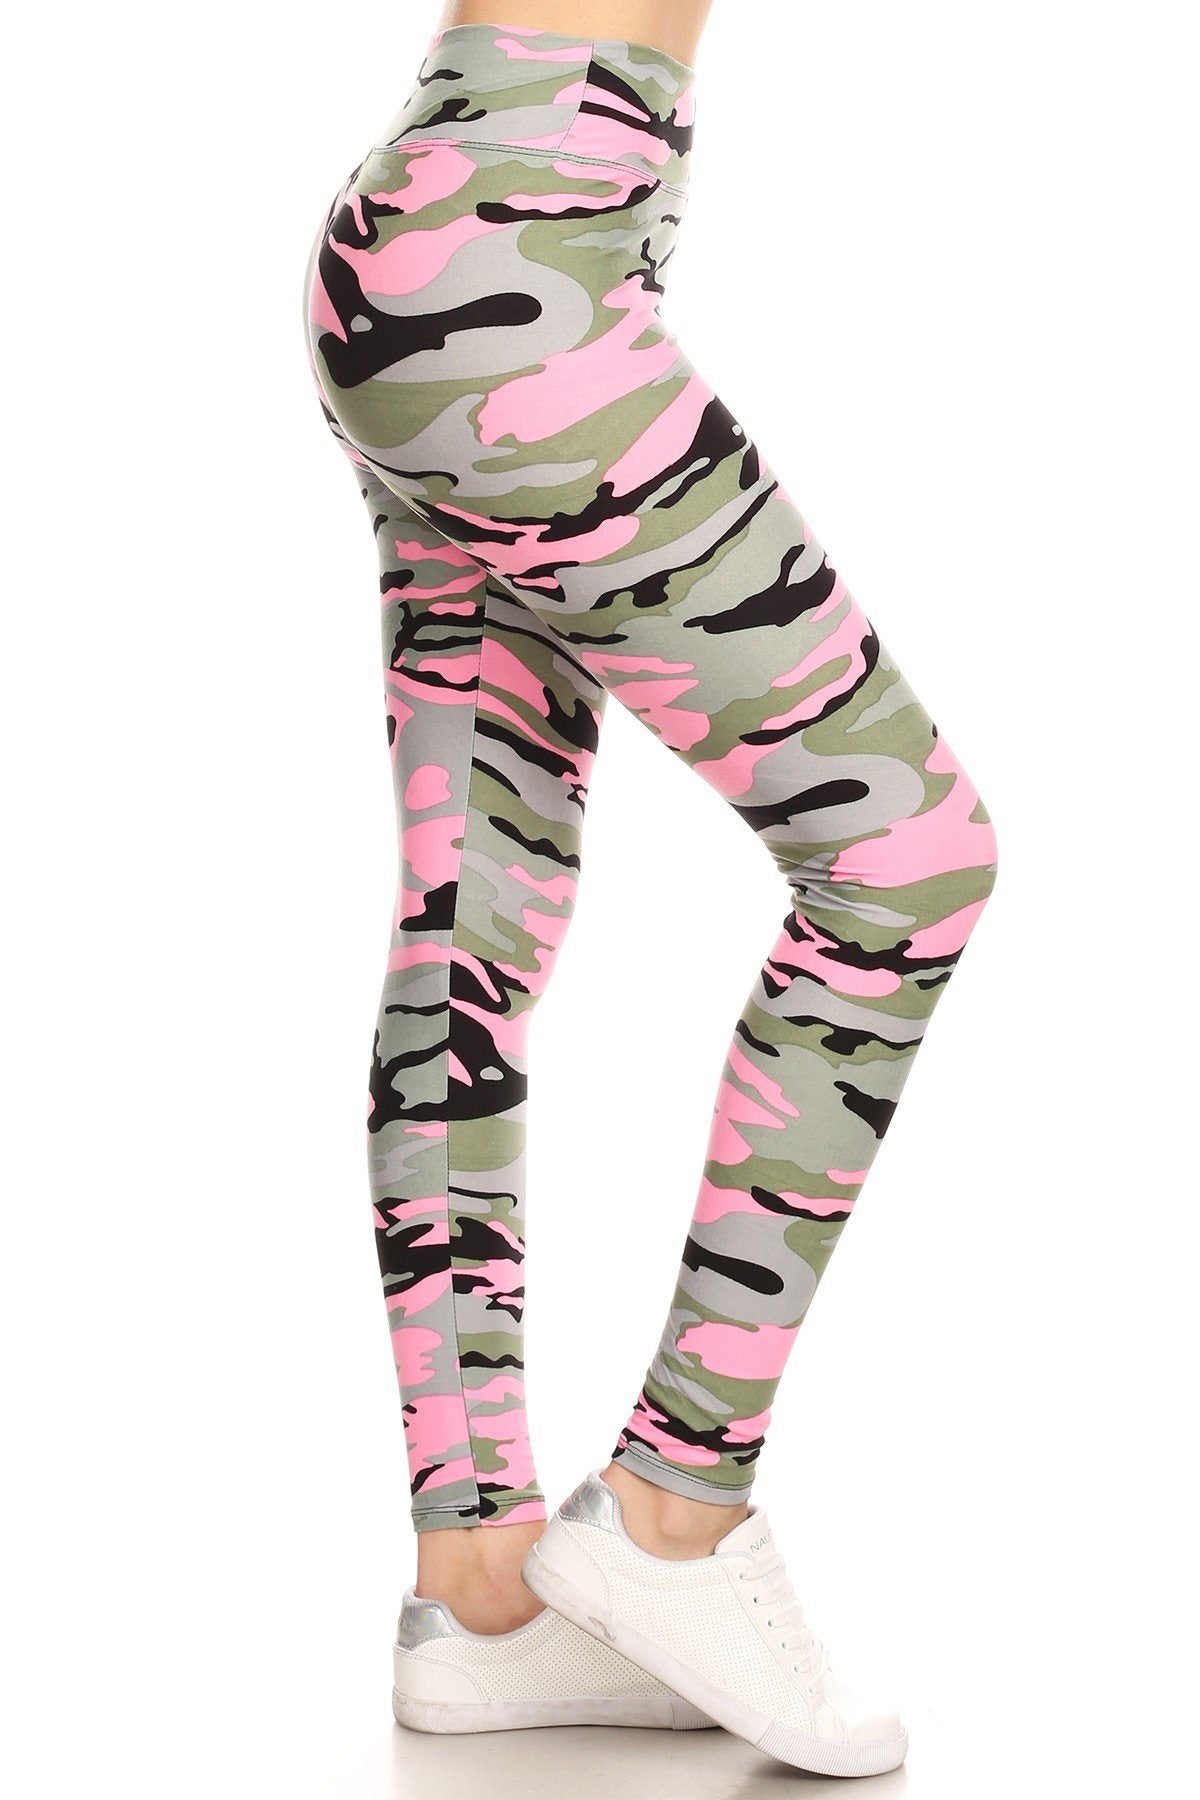 Womens Pink Camouflage Leggings: Yoga Waist Leggings MomMe and More 